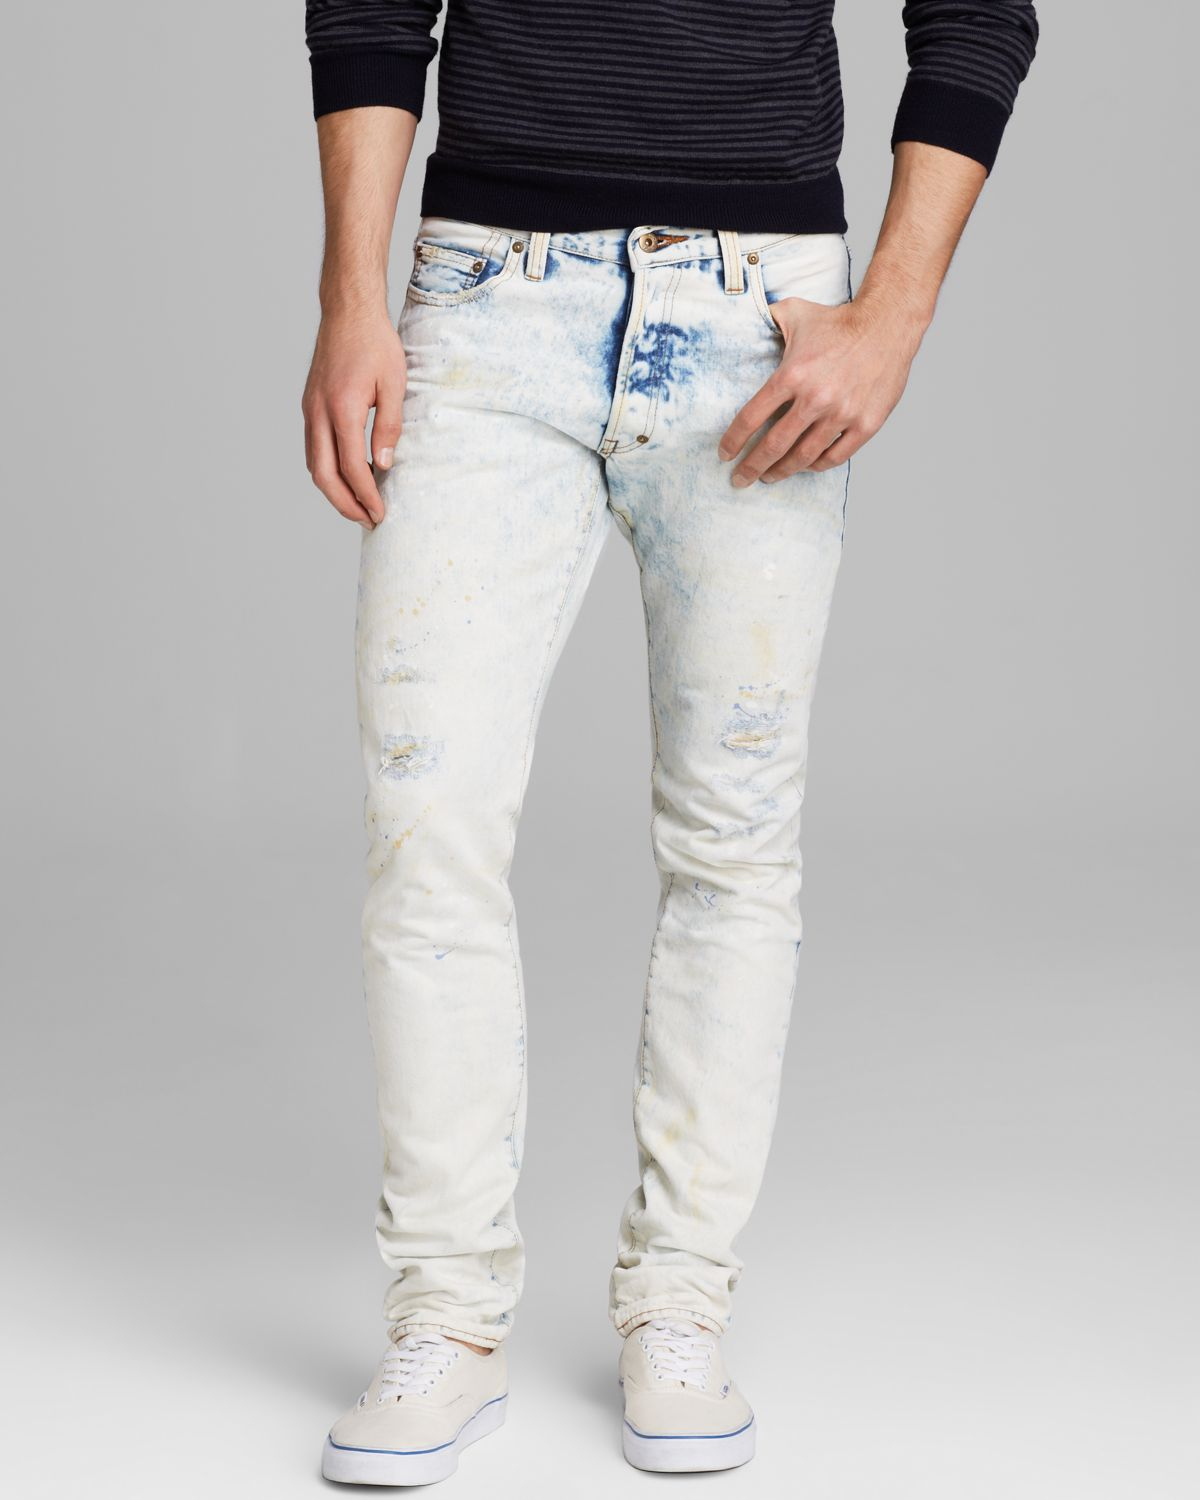 PRPS Jeans Barracuda Relaxed Fit in White Washed in Indigo (Blue) for Men -  Lyst